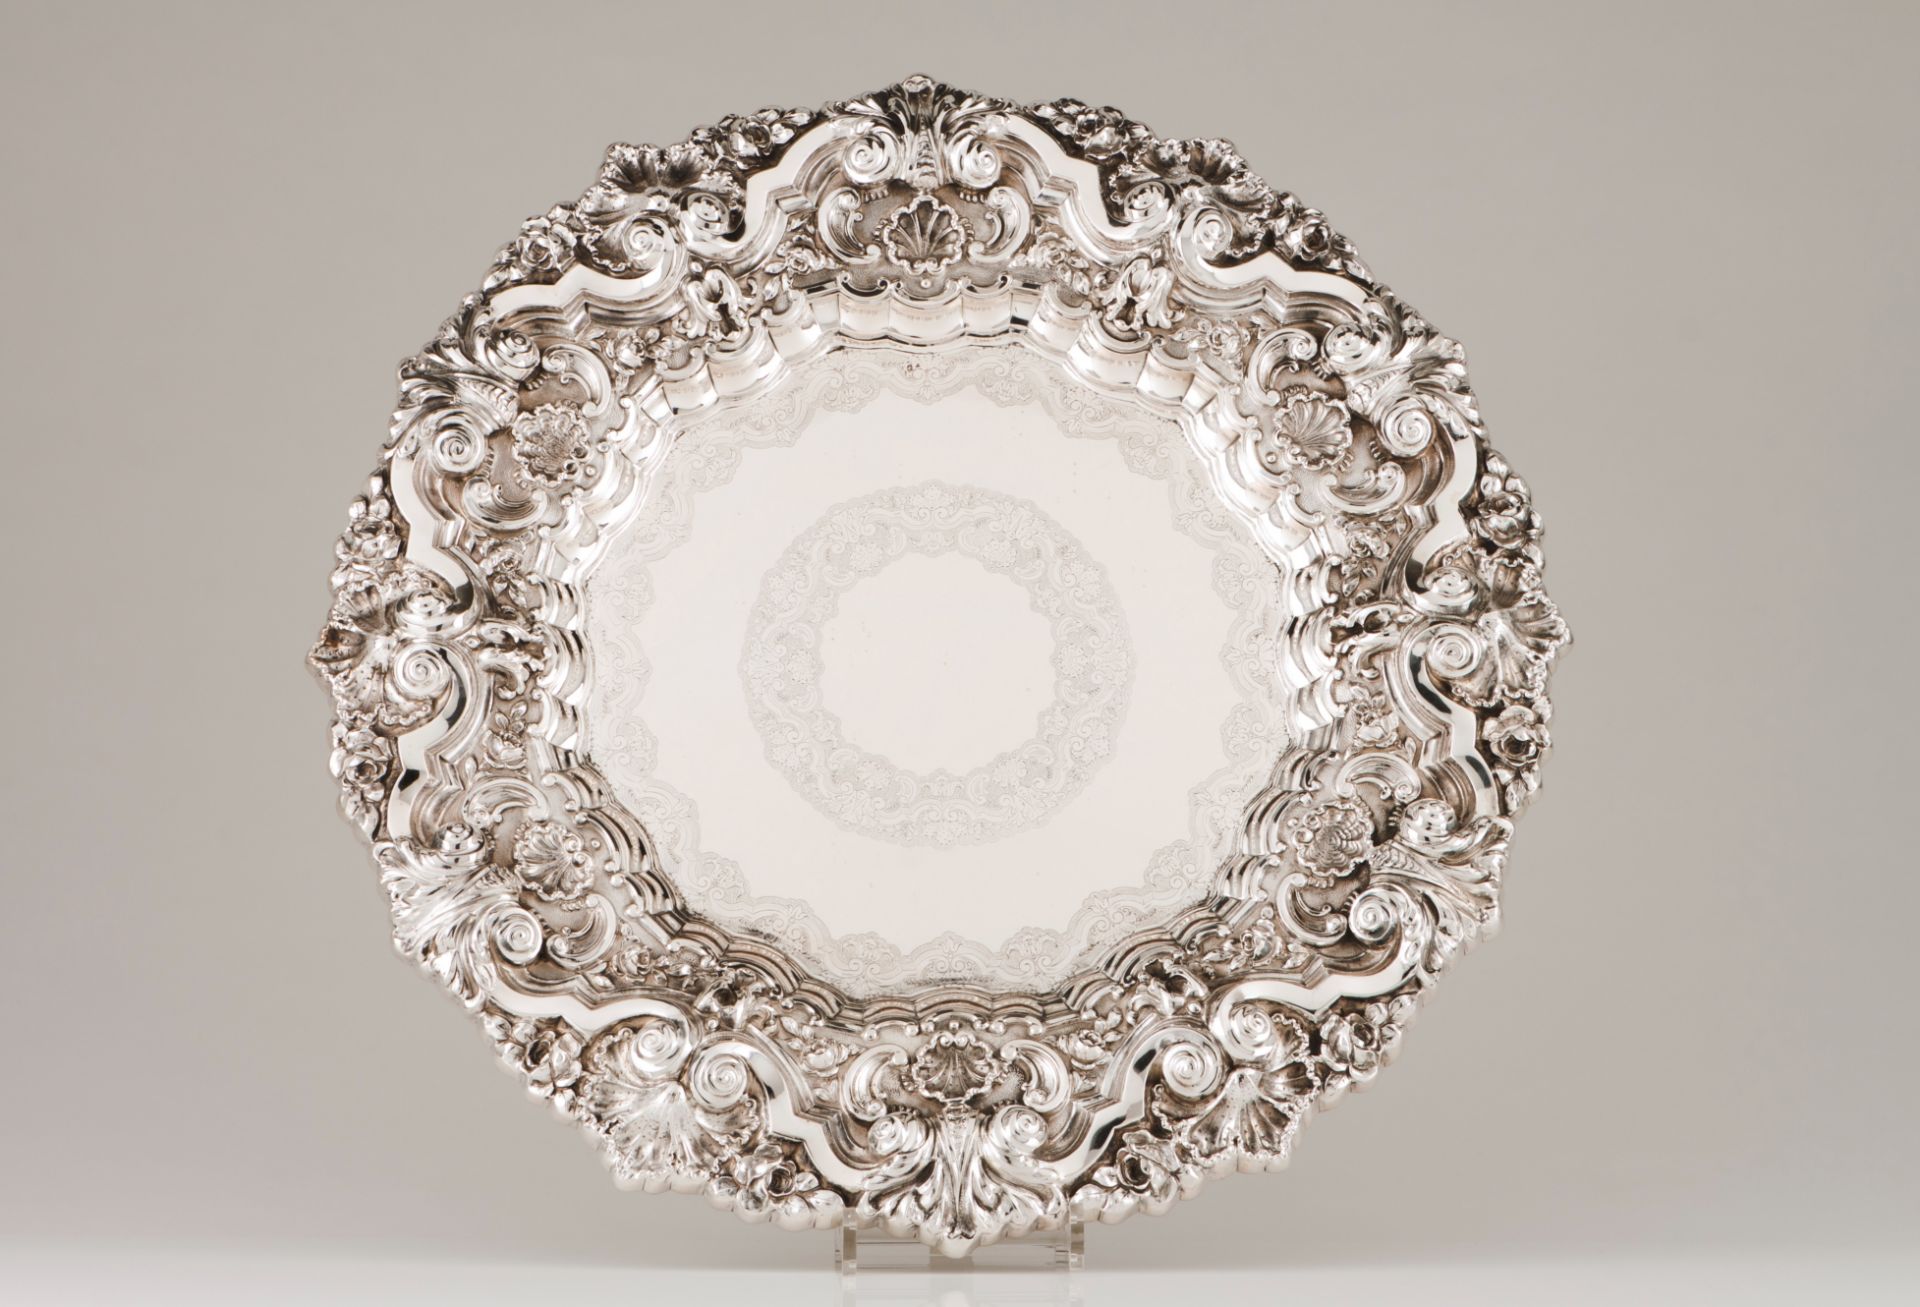 A large display salverPortuguese silver Plain centre of double chiselled band with foliage motifs